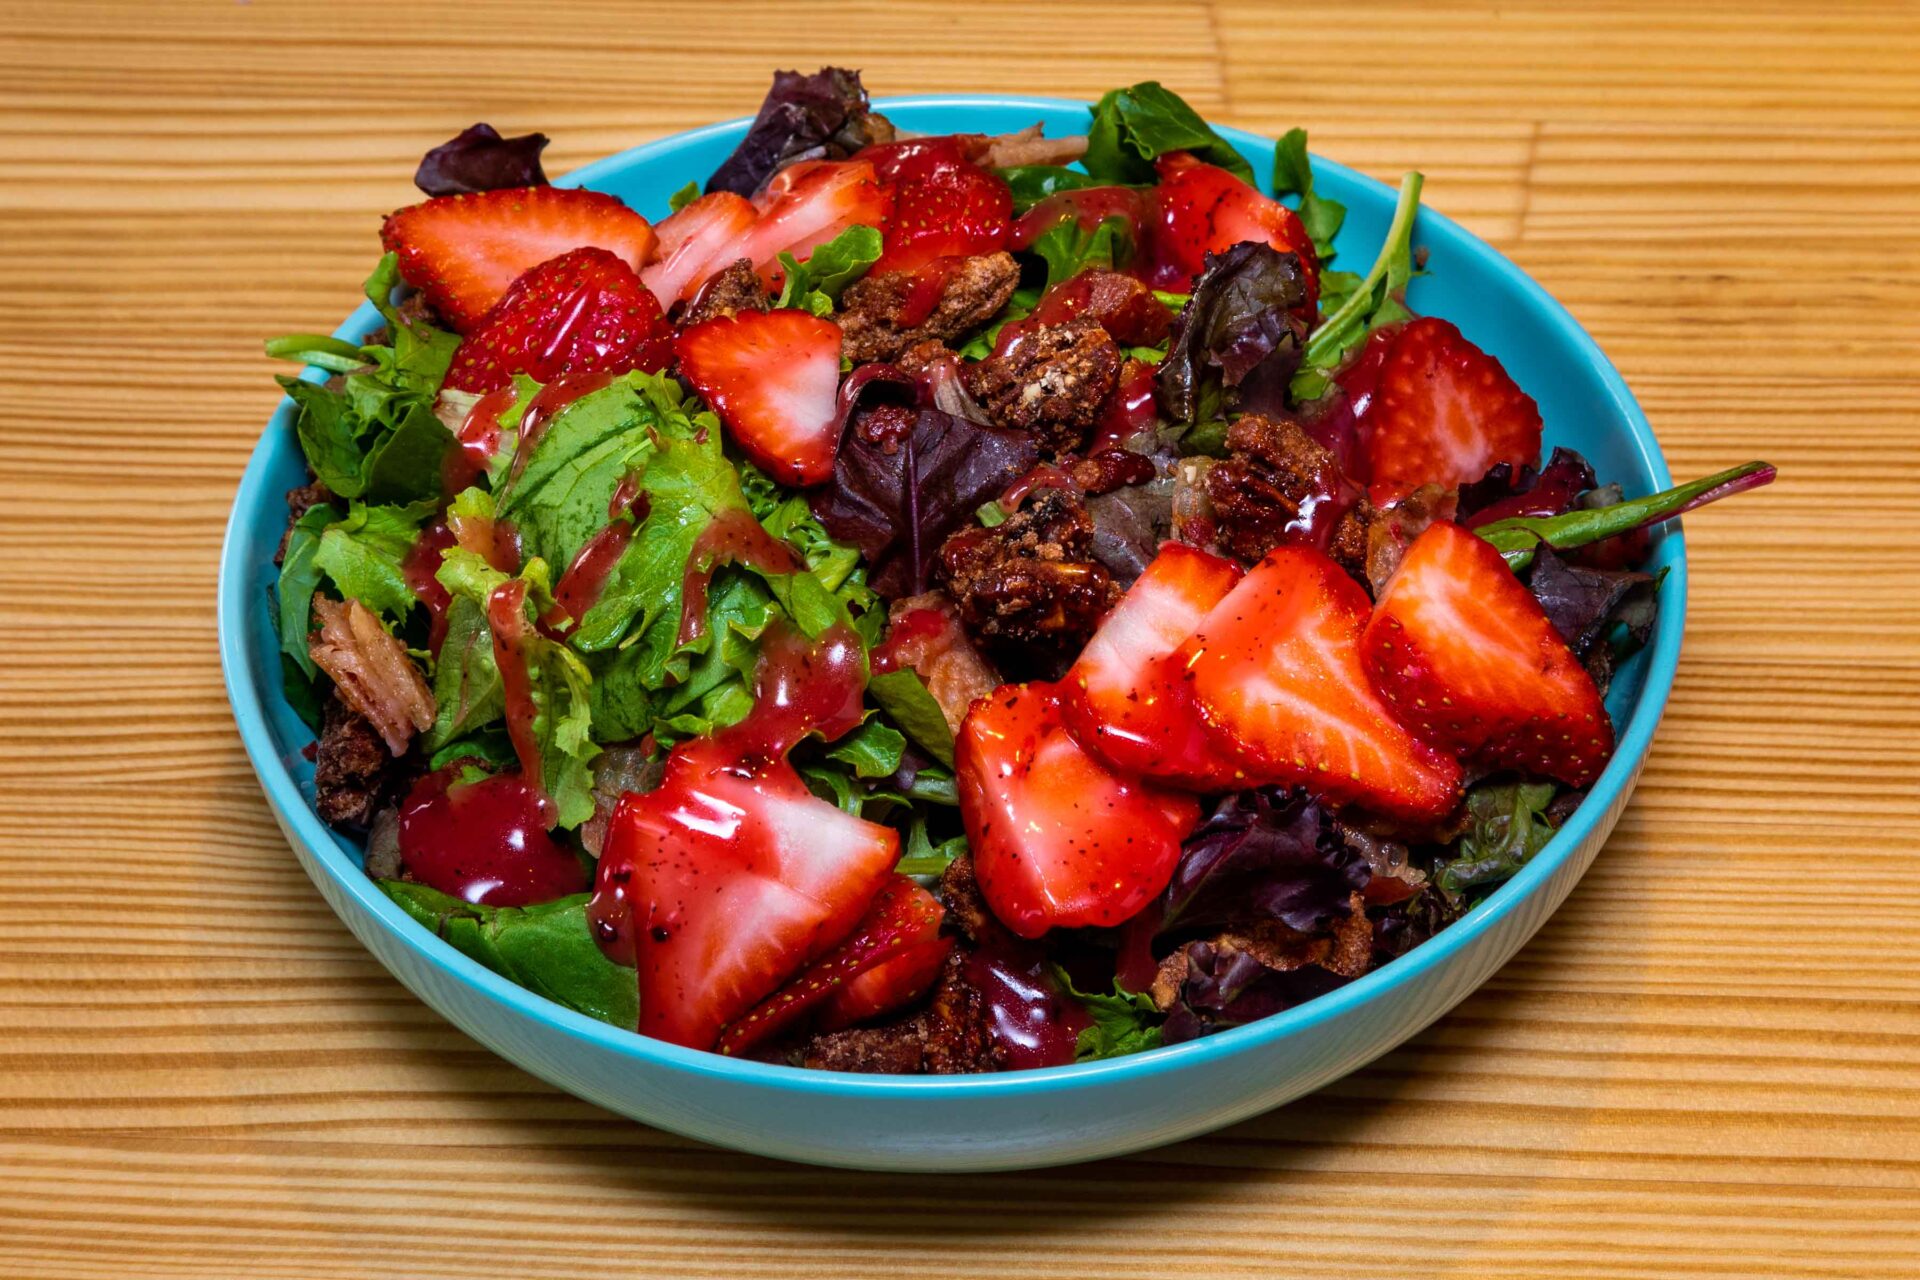 A bowl of salad with strawberries and nuts.